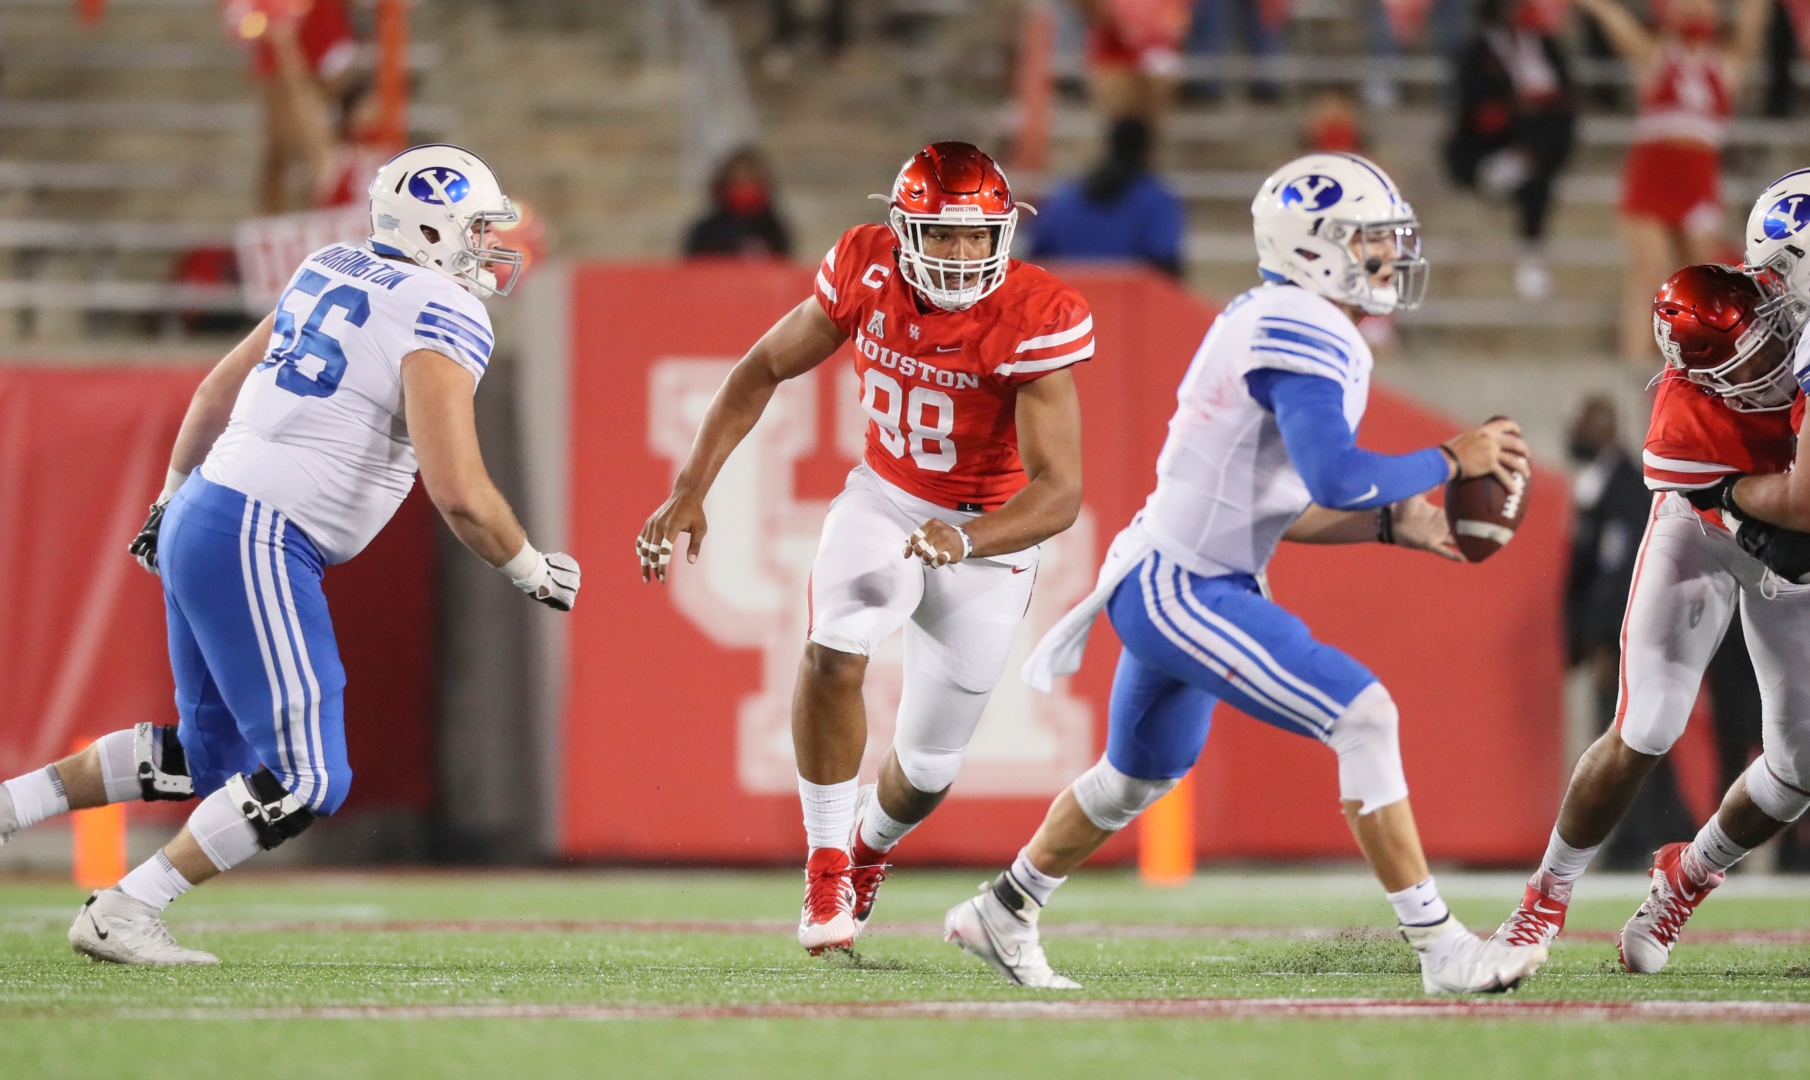 Former UH defensive end Payton Turner was selected 28th overall by the New Orleans Saints in the 2021 NFL Draft | Courtesy of UH athletics